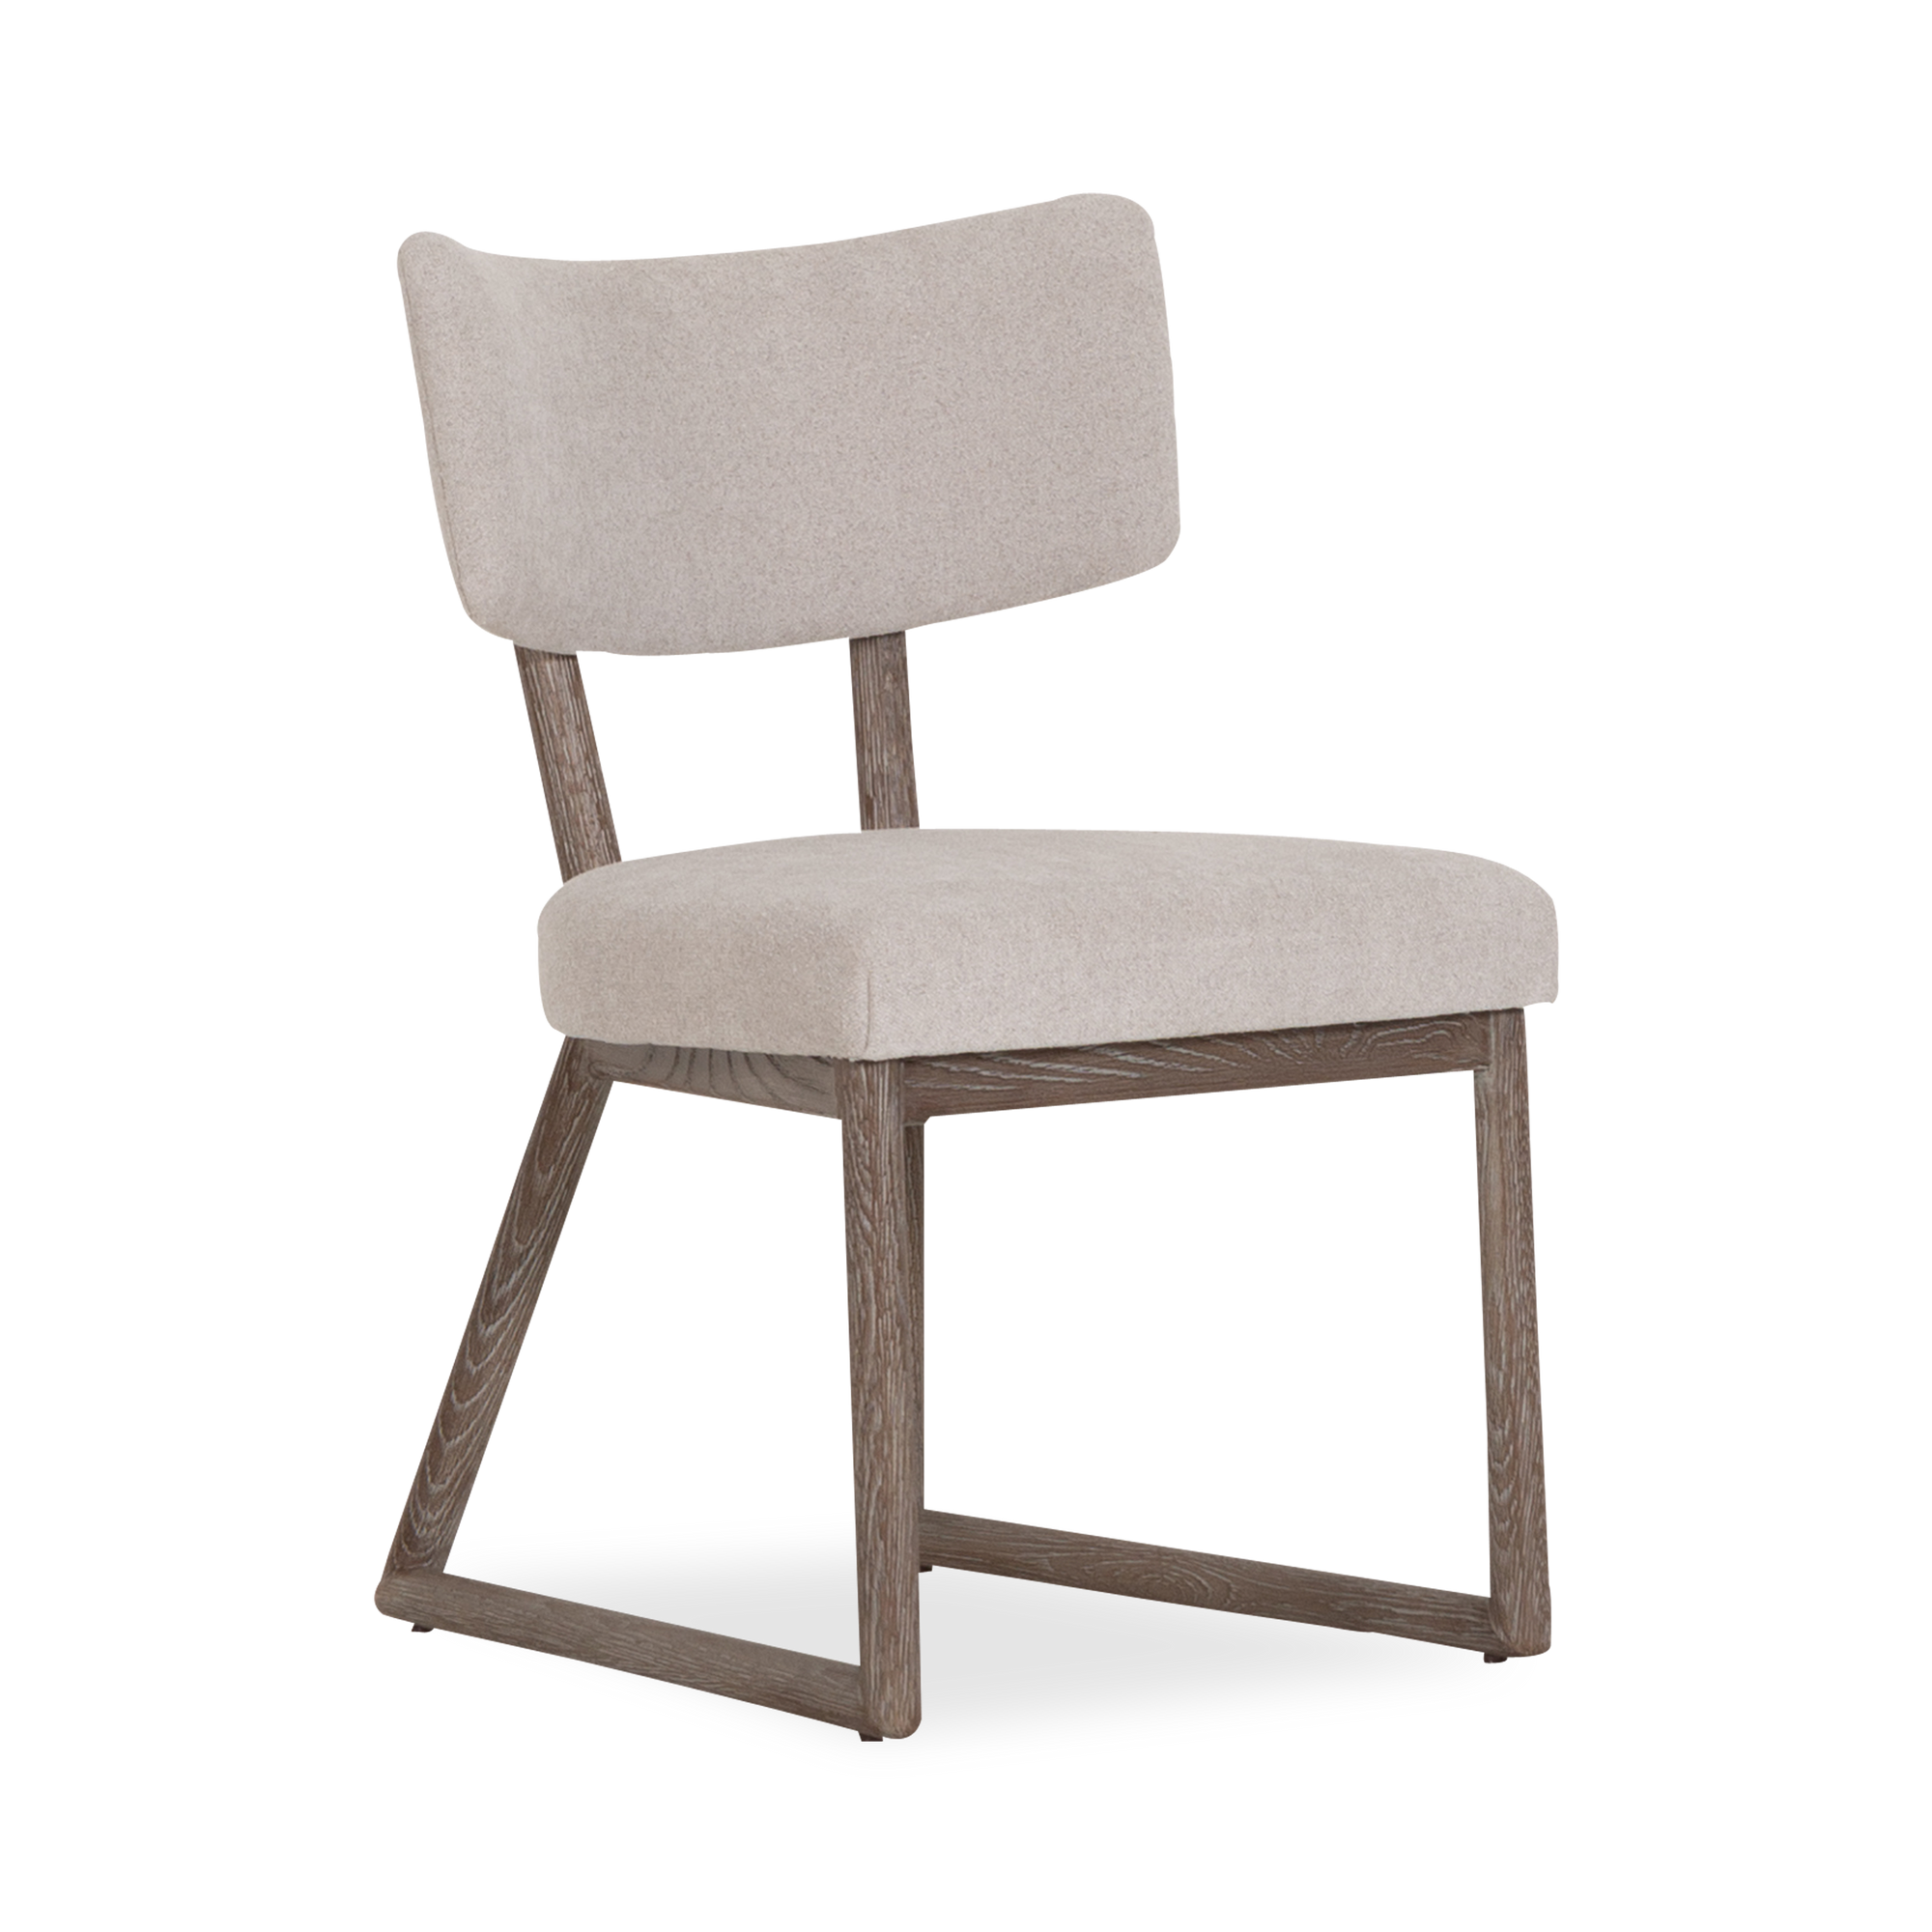 Give your dining space a fresh contemporary flair with the Fable Side Chair.